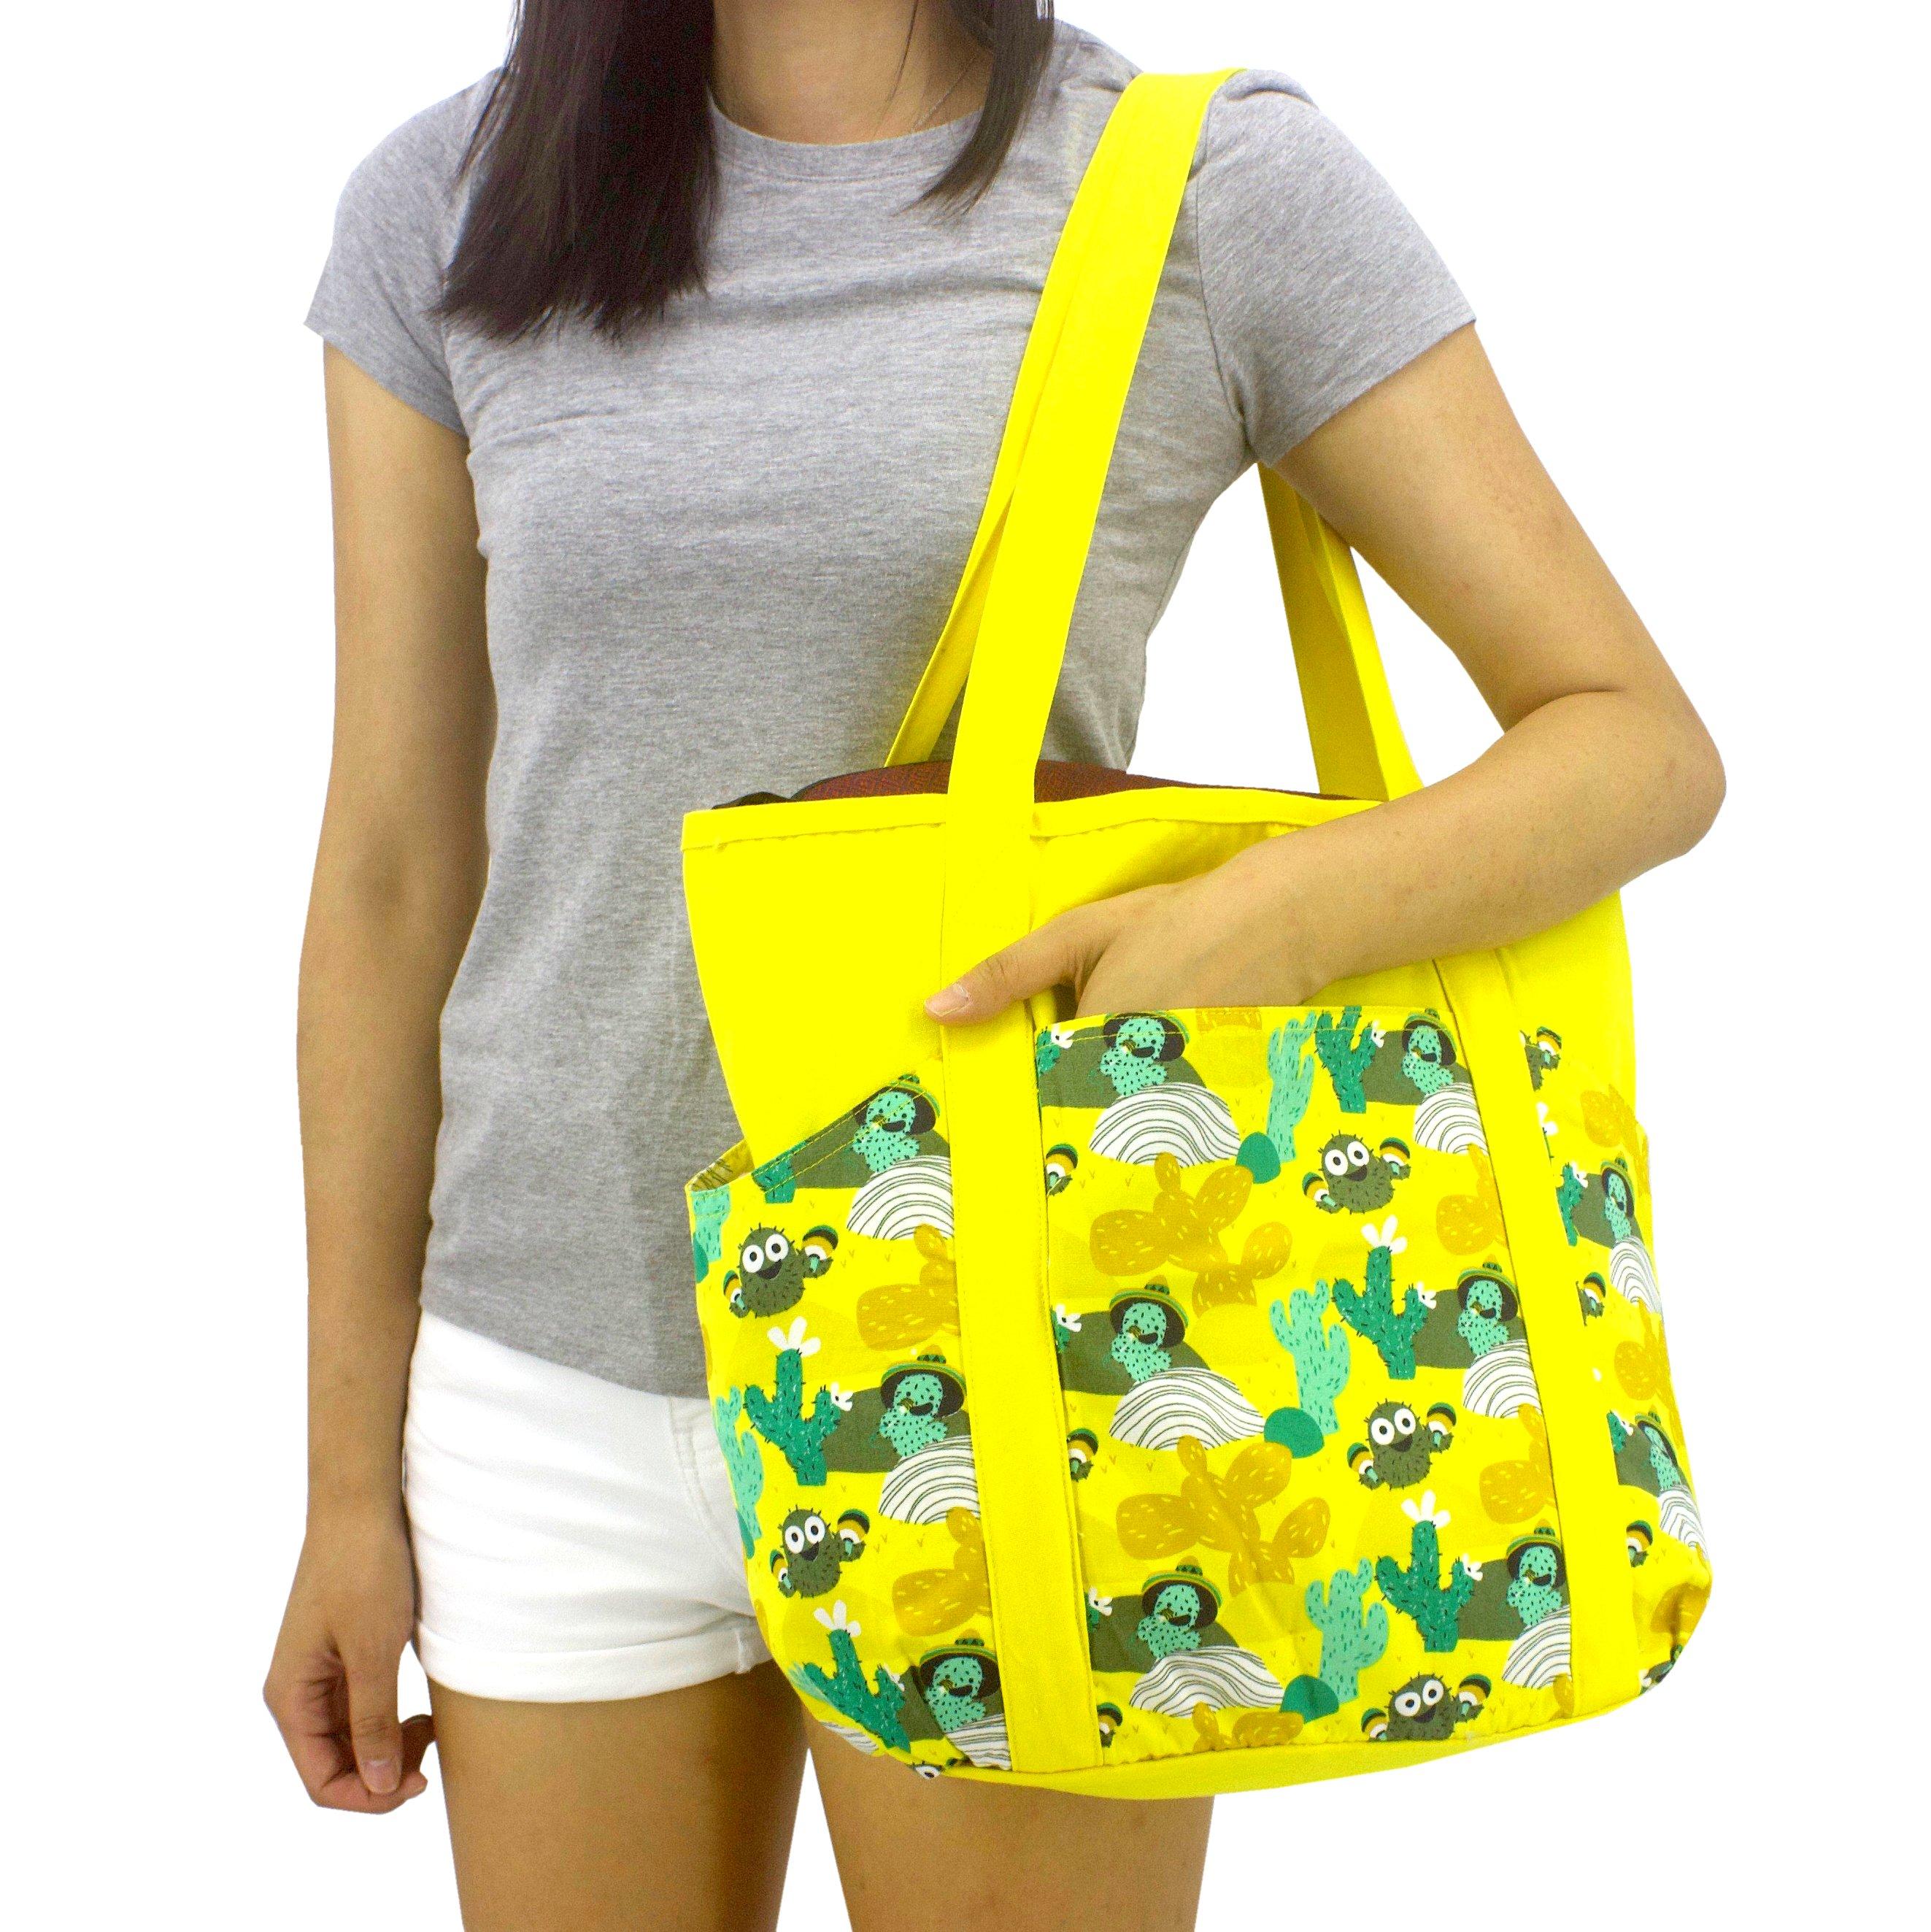 Bright Yellow Desert Themed Cactus Pattern Large Utility Shoulder Tote Shopper Bag with Pockets